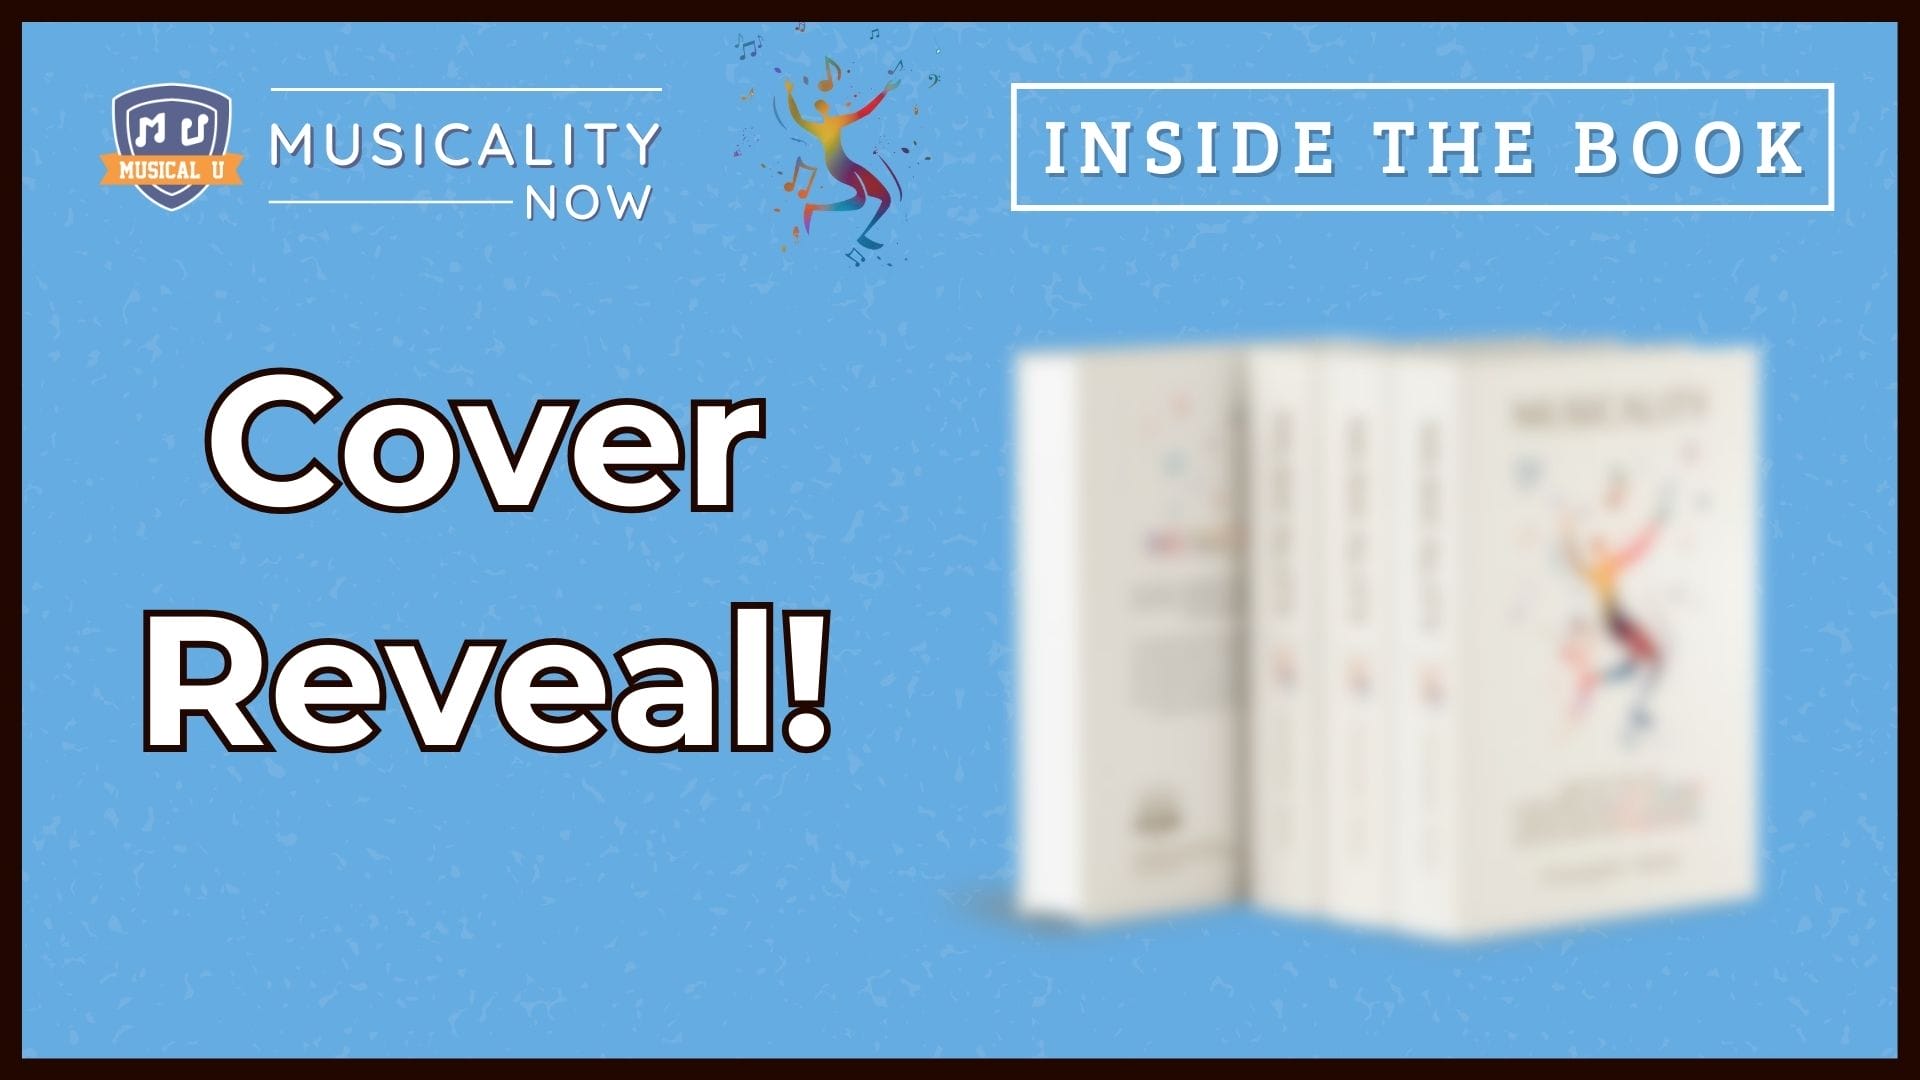 The Musicality Book Cover Reveal! (Inside The Book)